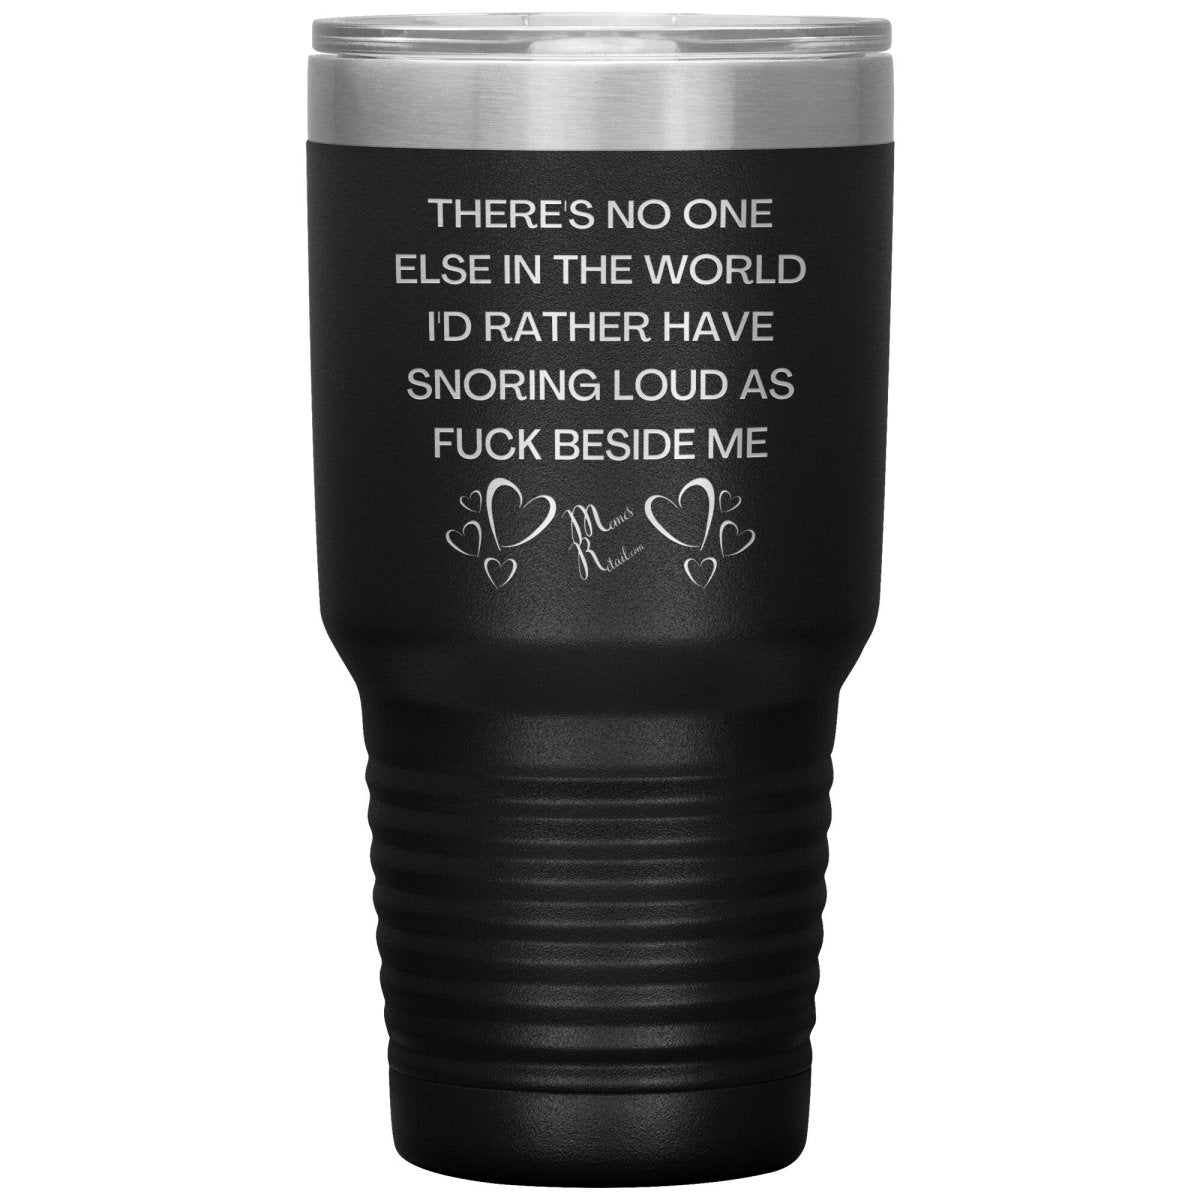 There's No One Else in the World I'd Rather Have Snoring Loud, 30oz Insulated Tumbler / Black - MemesRetail.com